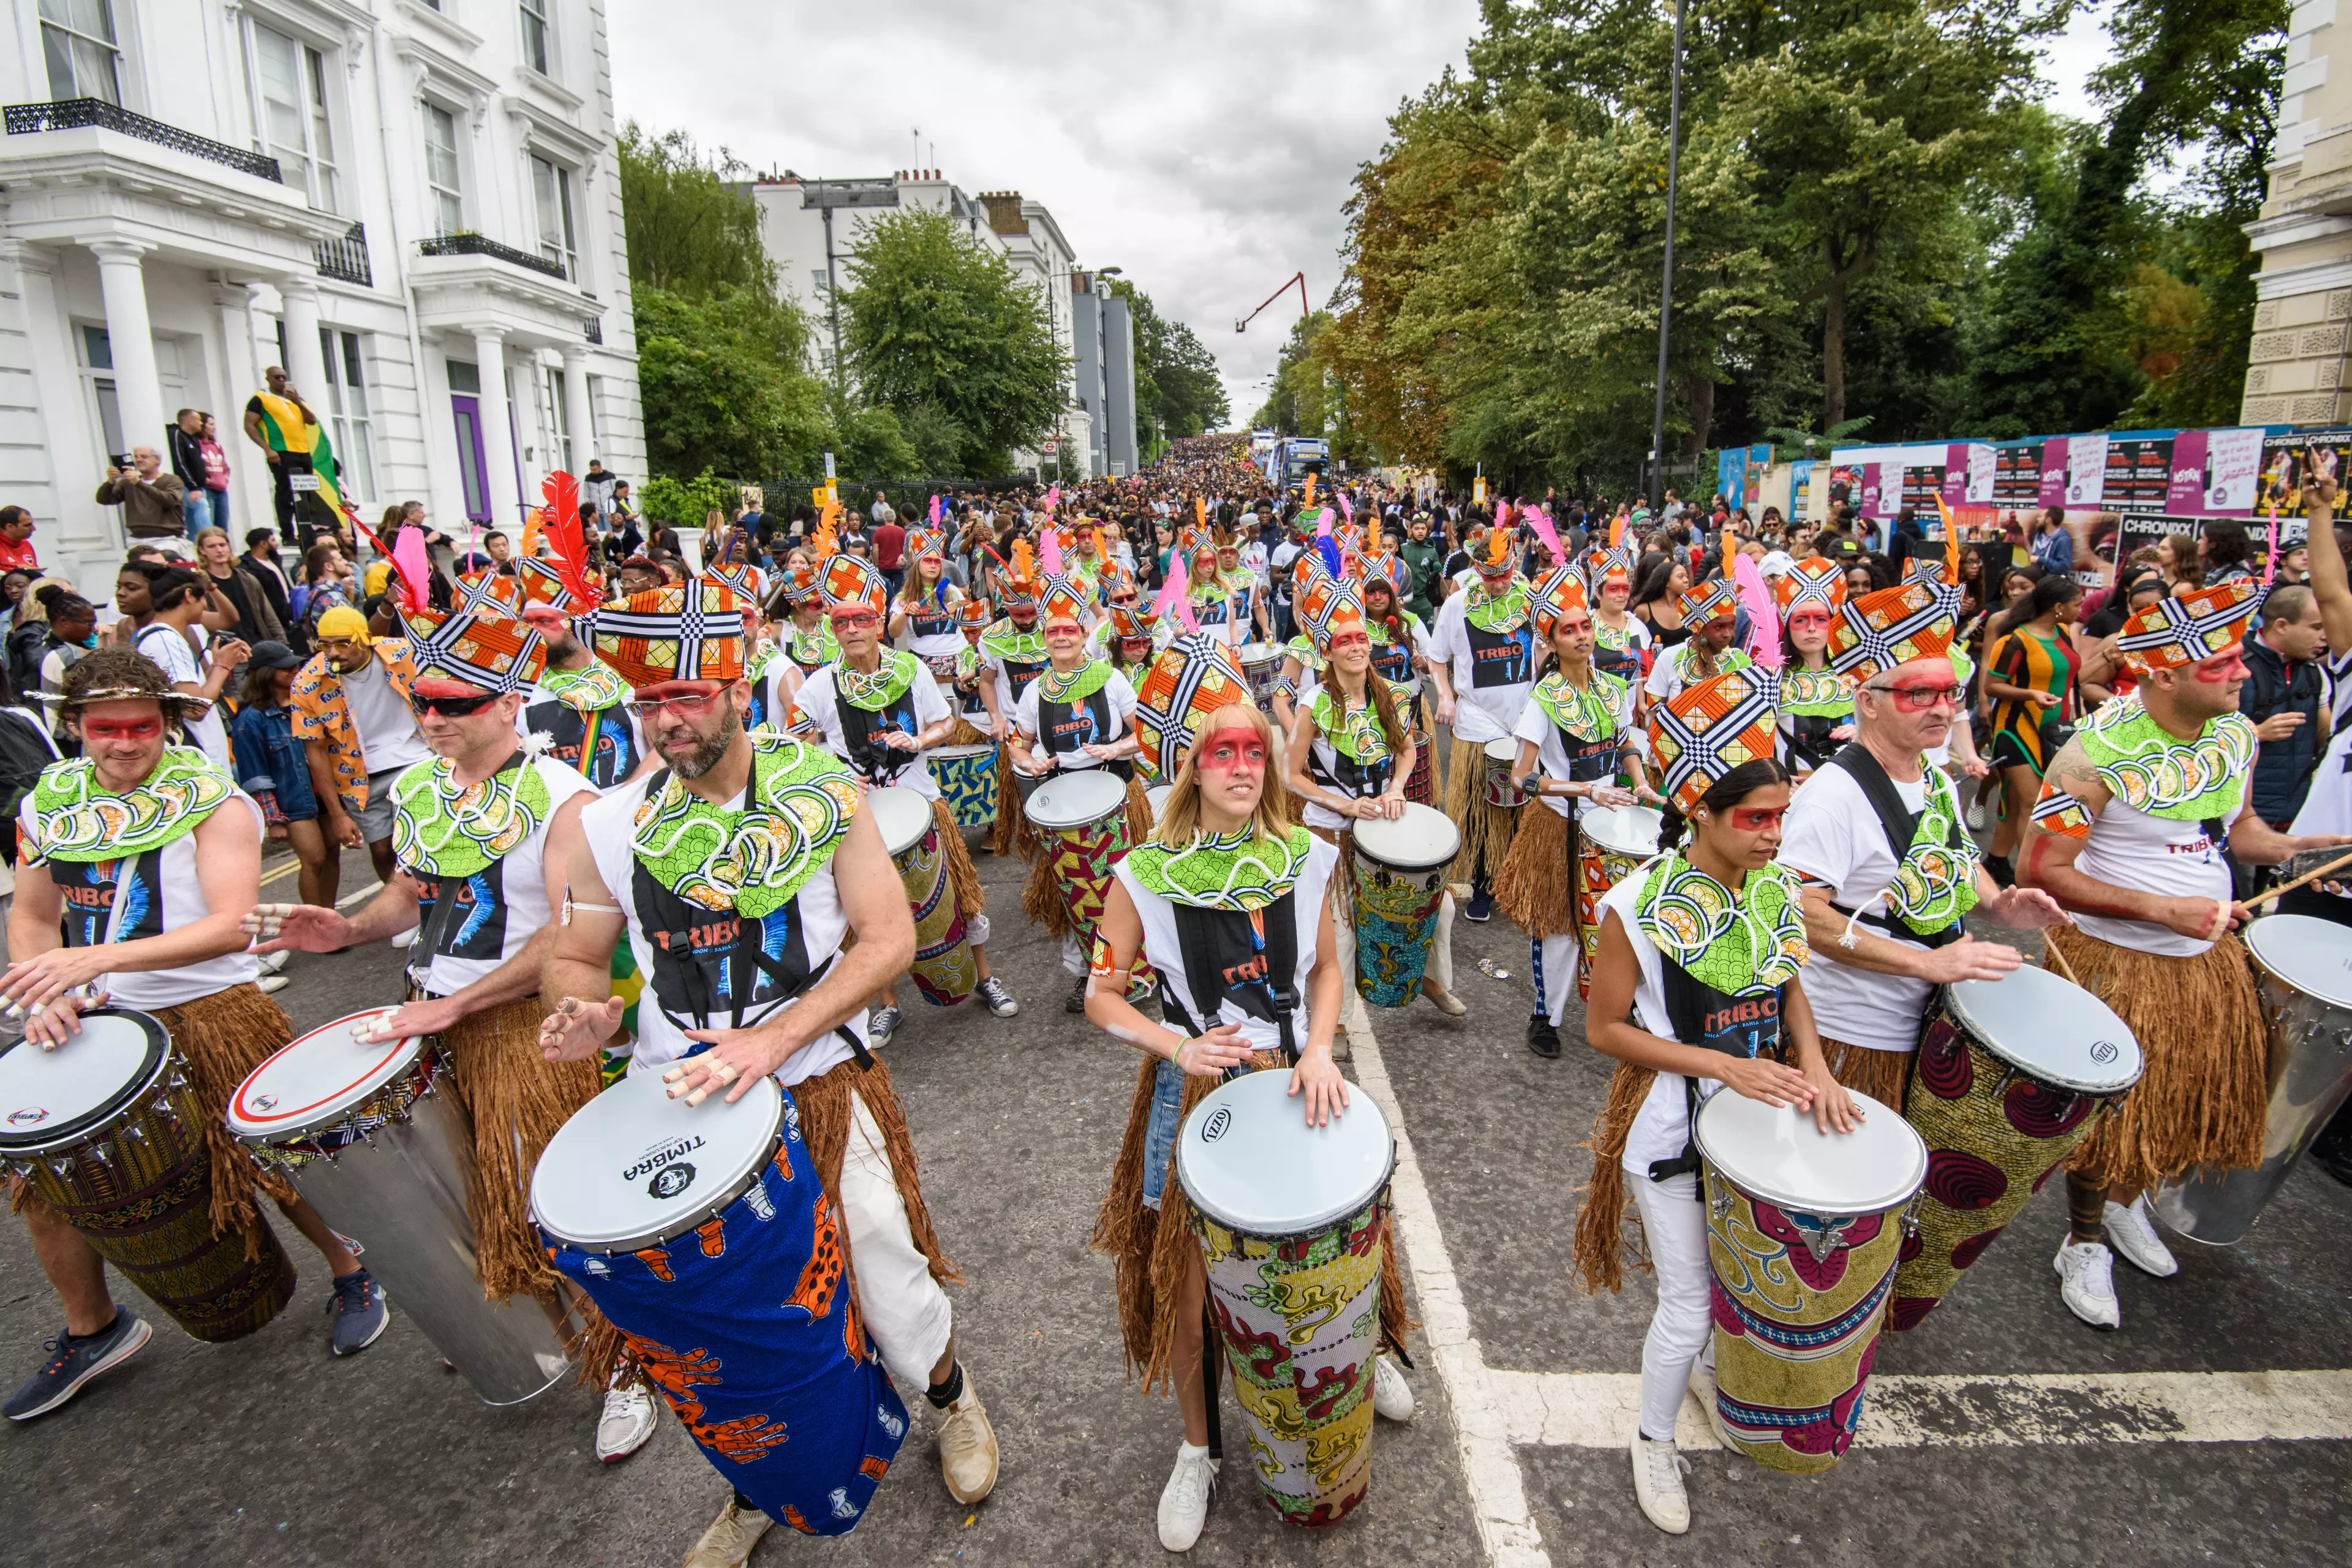 Revellers wanting to make the most of the sun can enjoy Notting Hill Carnival